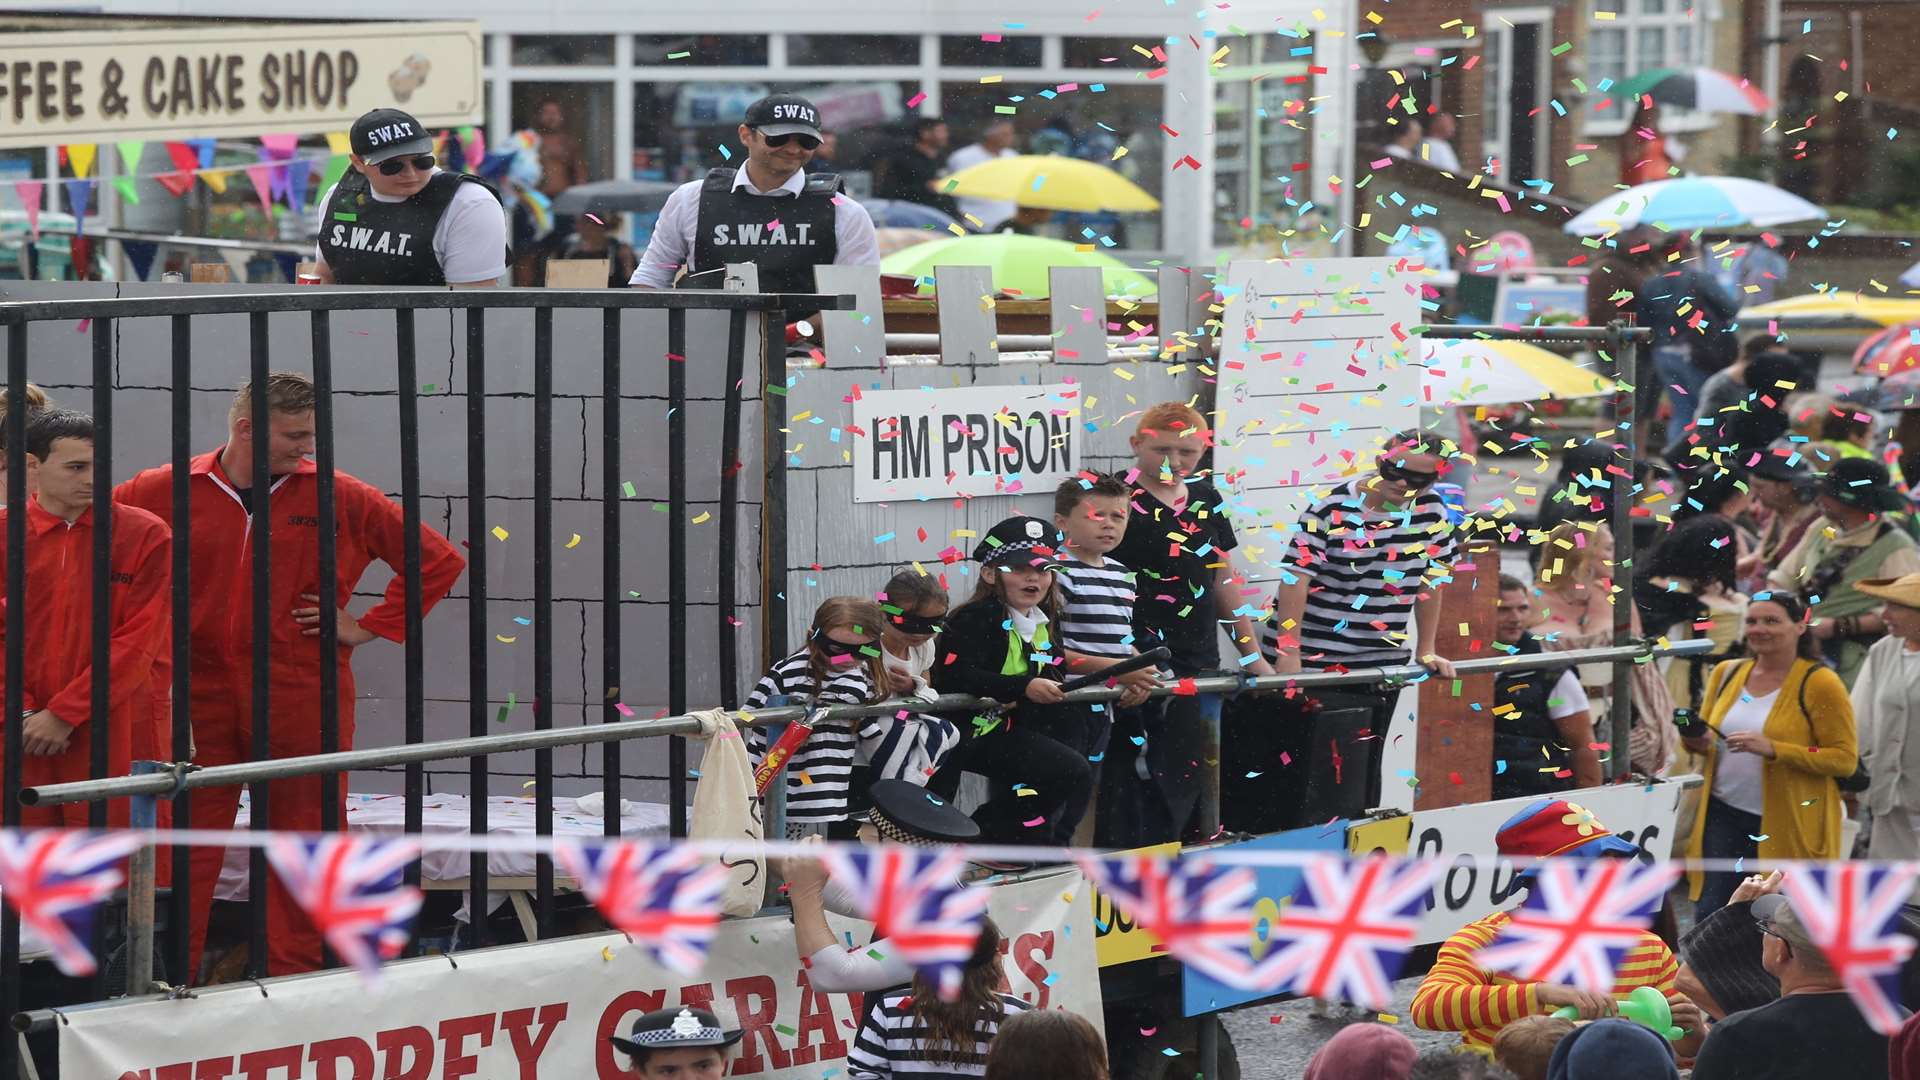 The HM Prison float at the annual Leysdown Carnival.